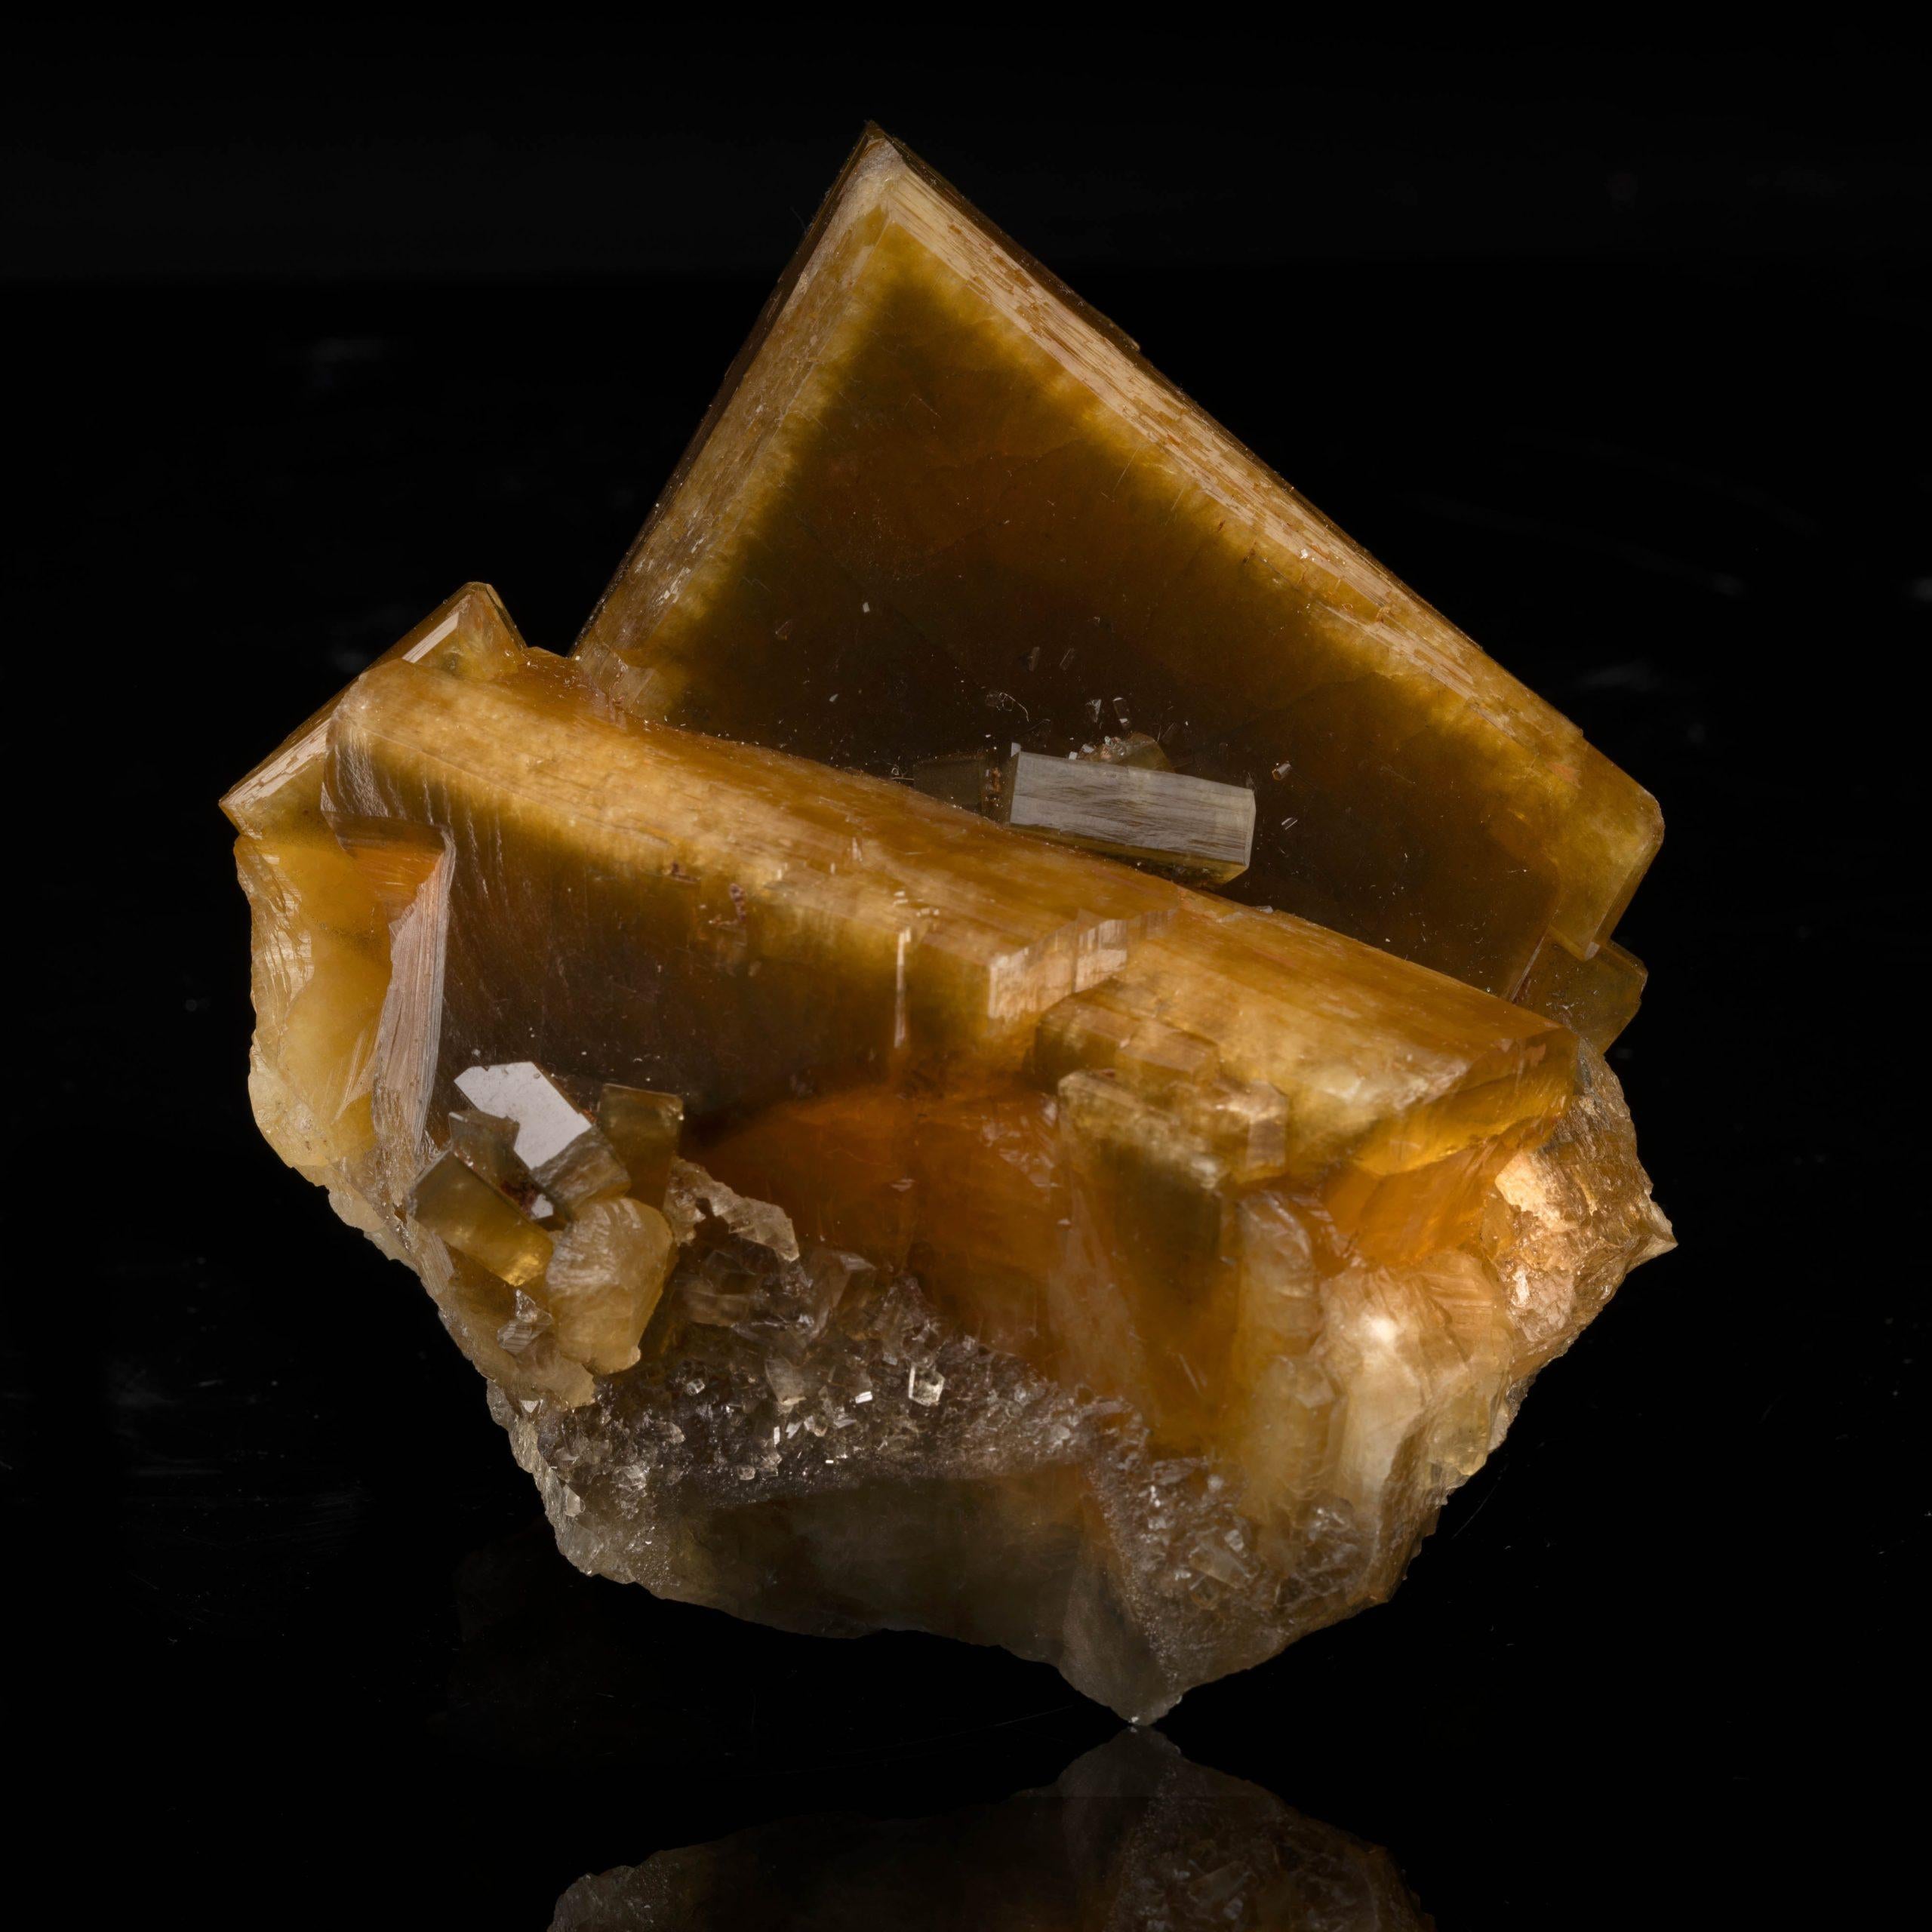 This hefty golden barite from China, location of a number of substantial golden barite finds, features huge, dense, beautifully formed crystals with great natural luster. Golden barite is rarer than more common blue, white, and gray barites and